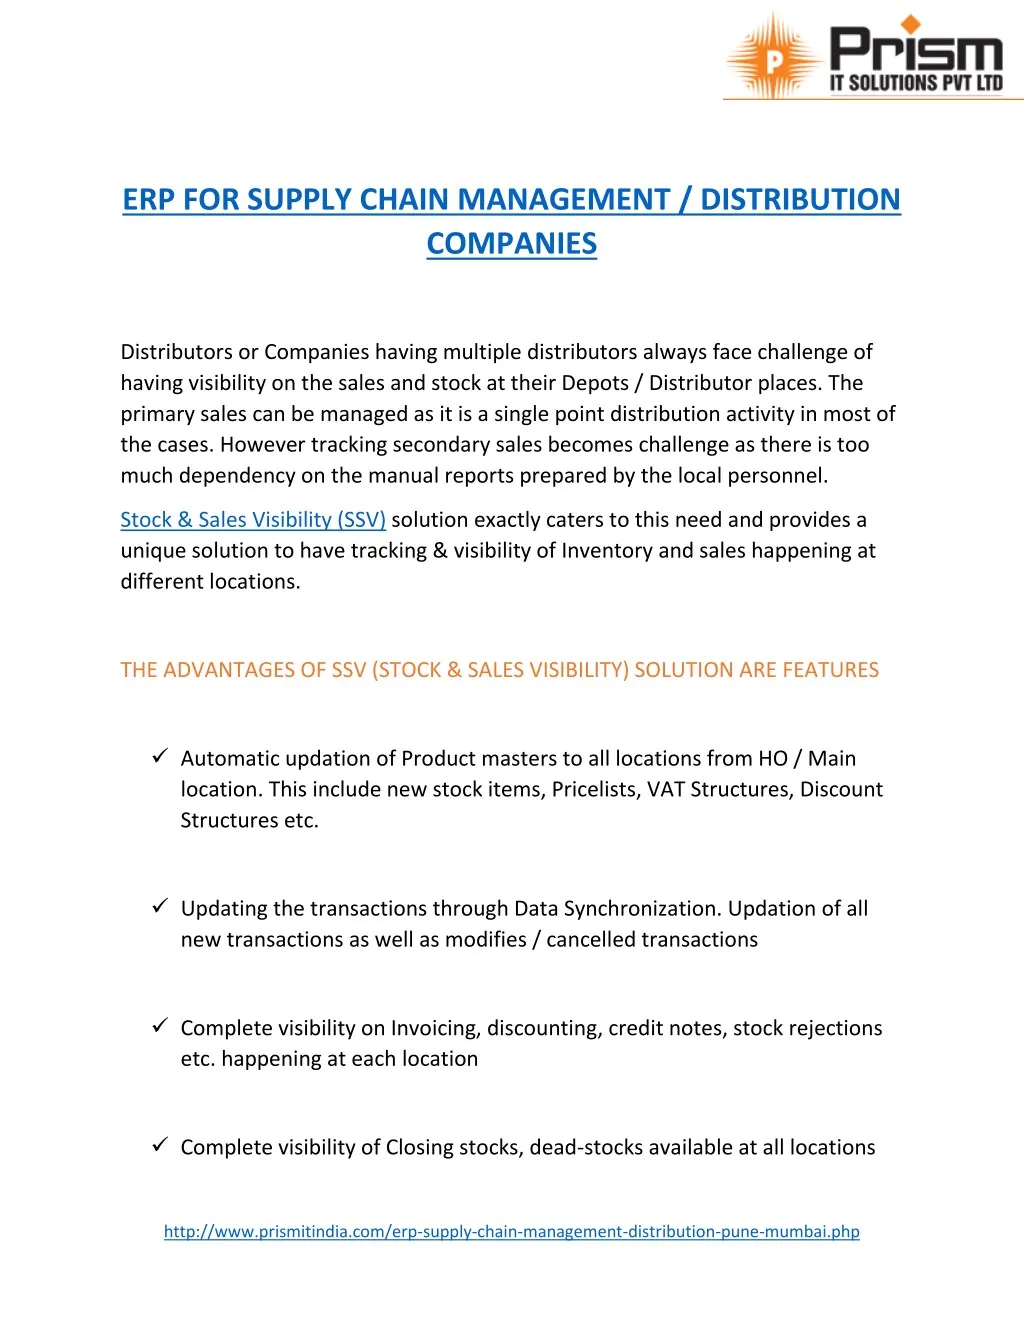 erp for supply chain management distribution